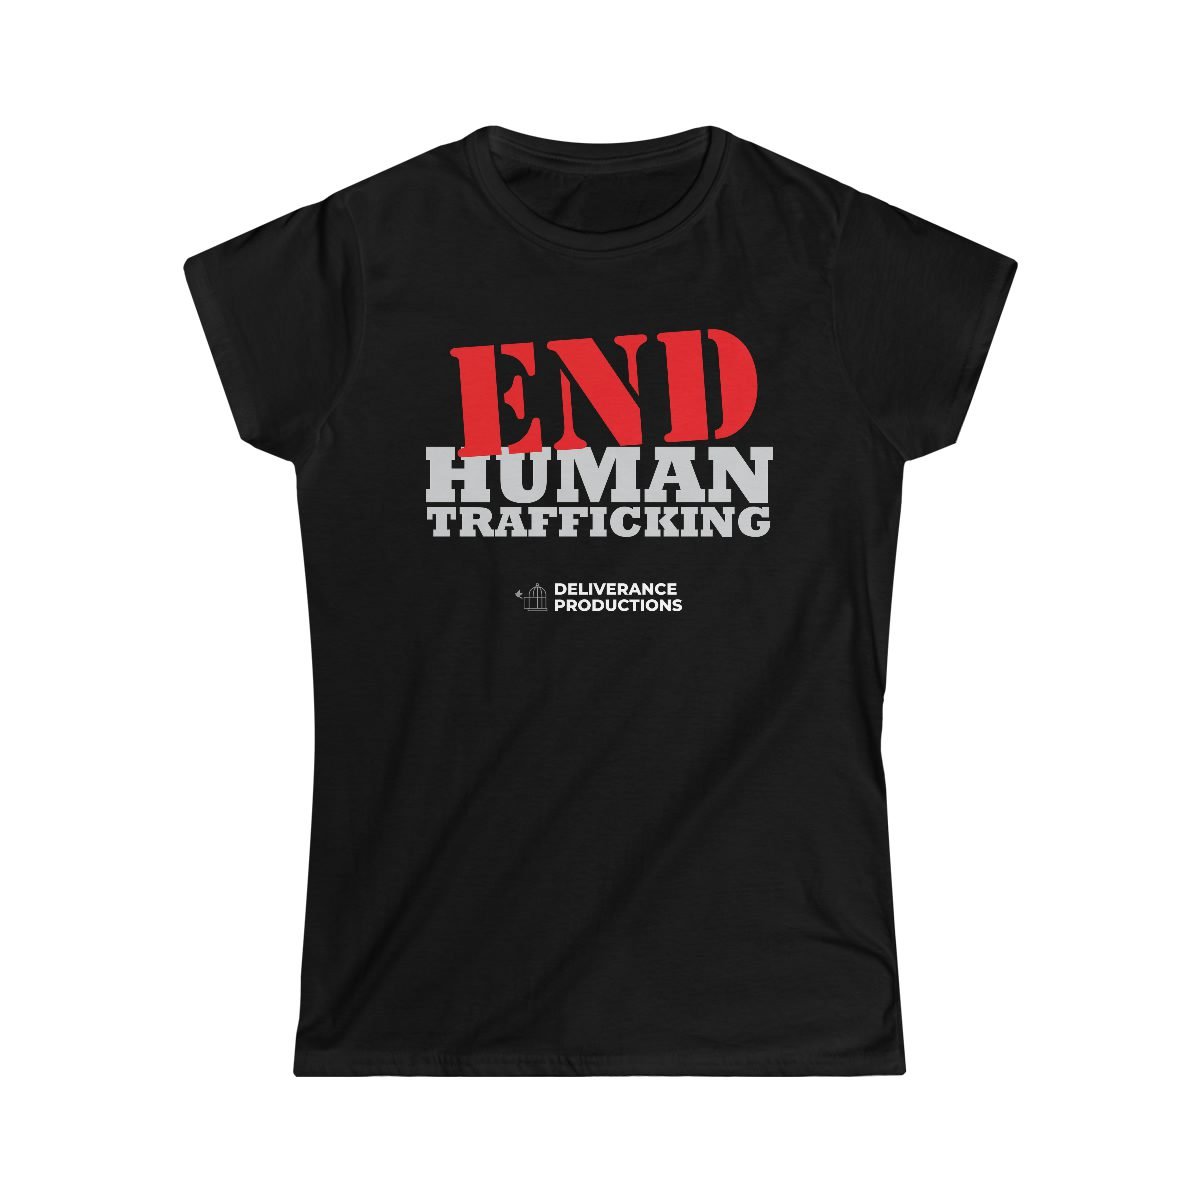 Deliverance Productions – End Human Trafficking Women’s Short Sleeve Tshirt